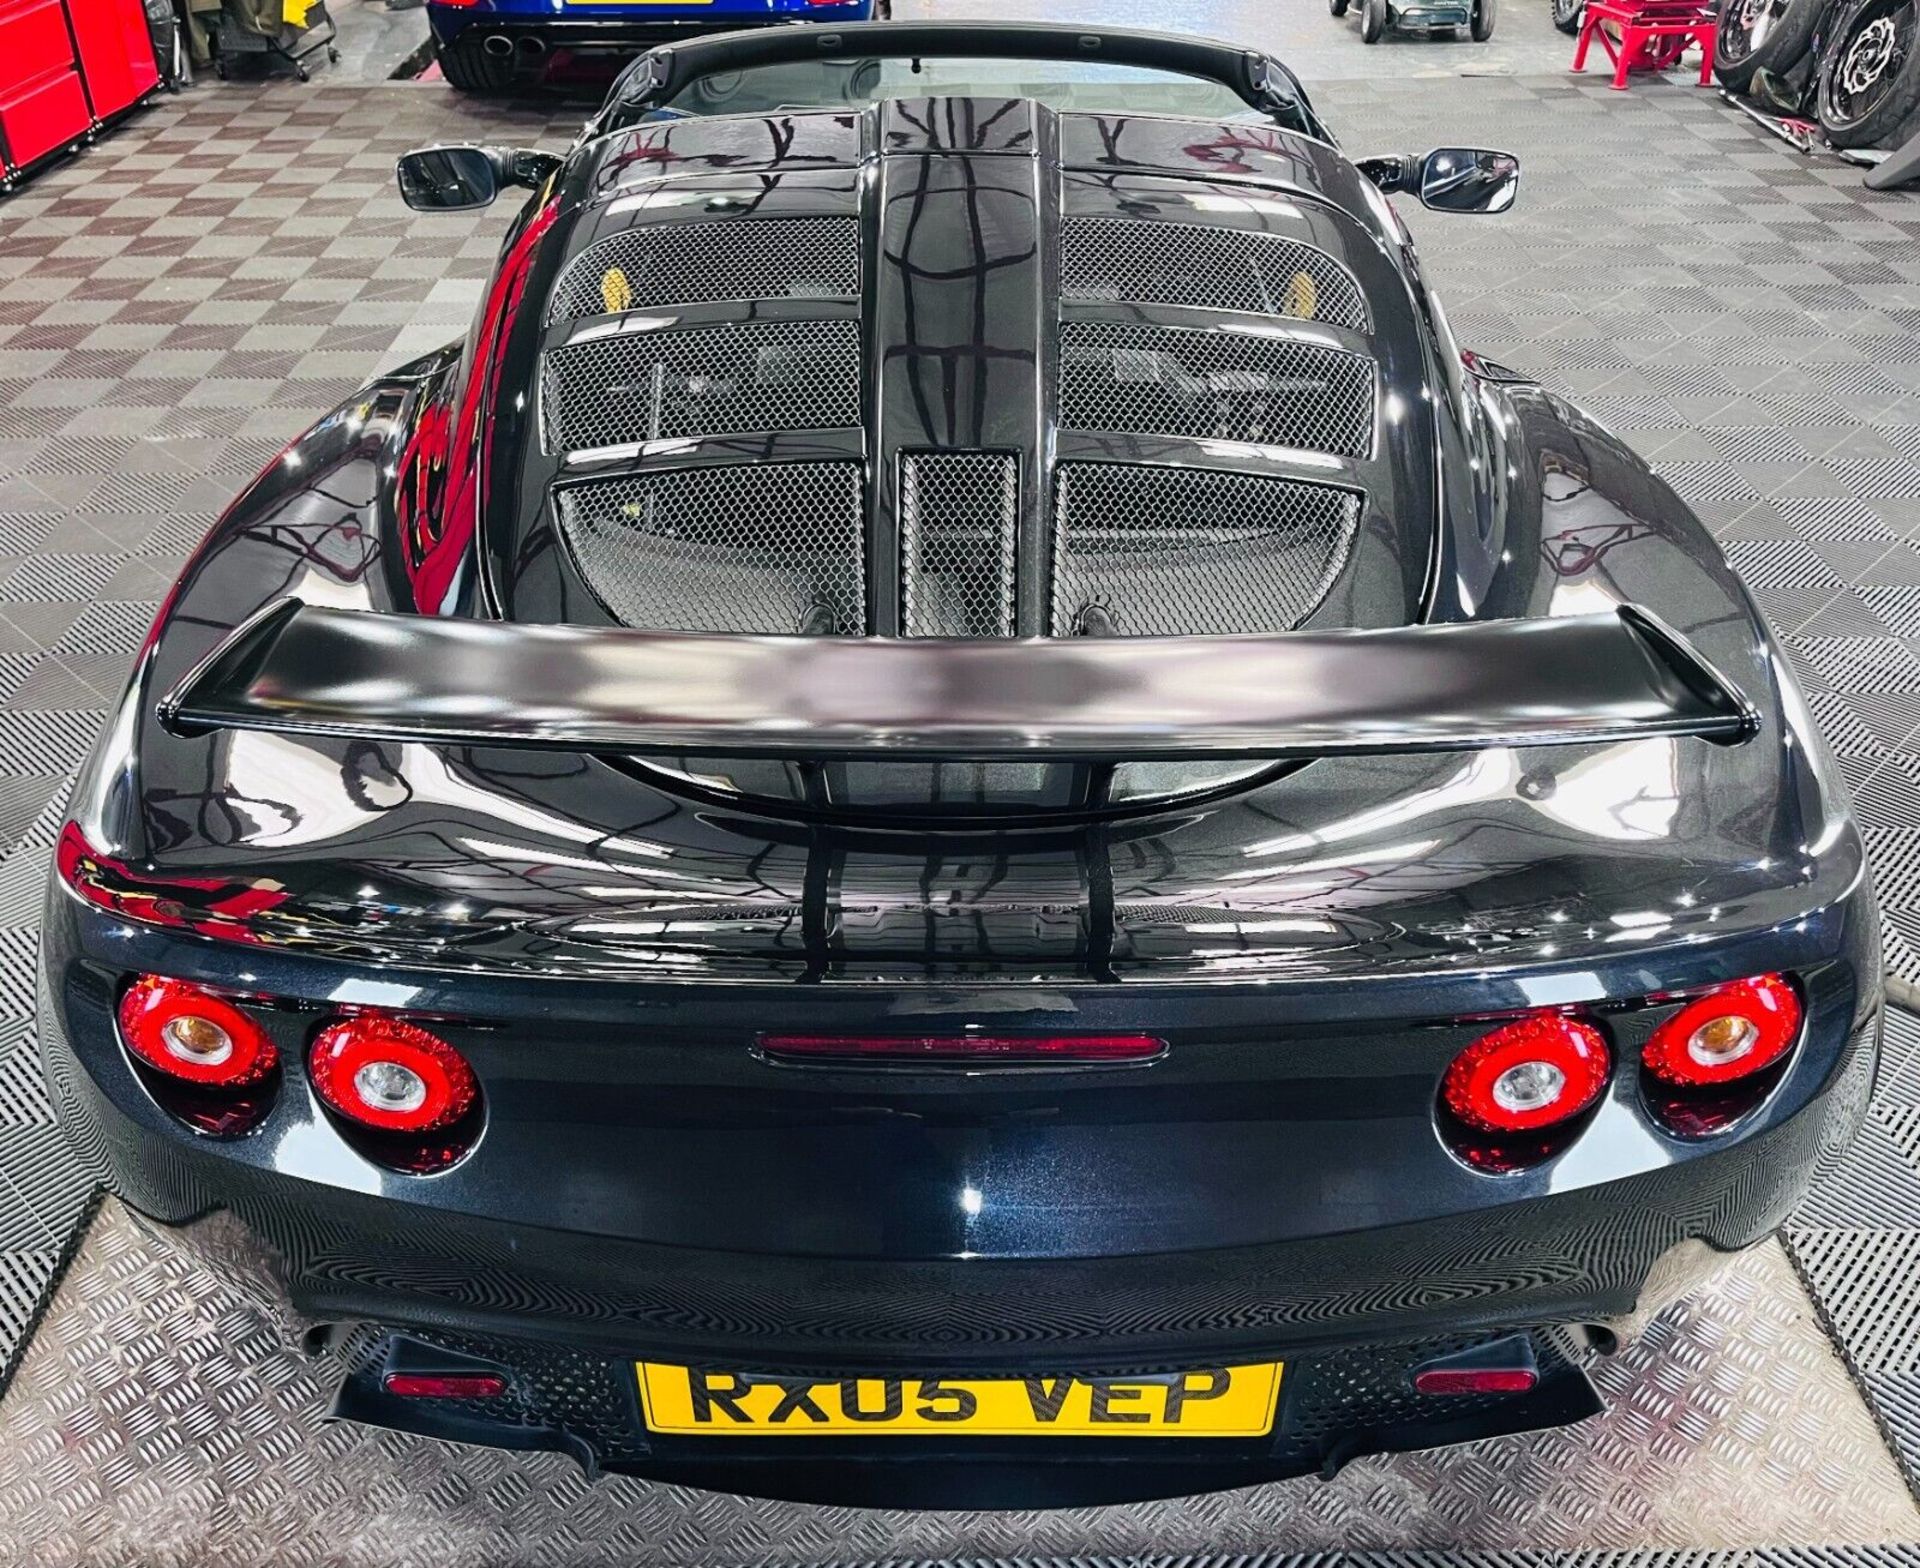 1 OF 50 MADE! 2005 Lotus Exige 240R S2 Limited Edition - 25000 miles - see description for details - Image 5 of 9